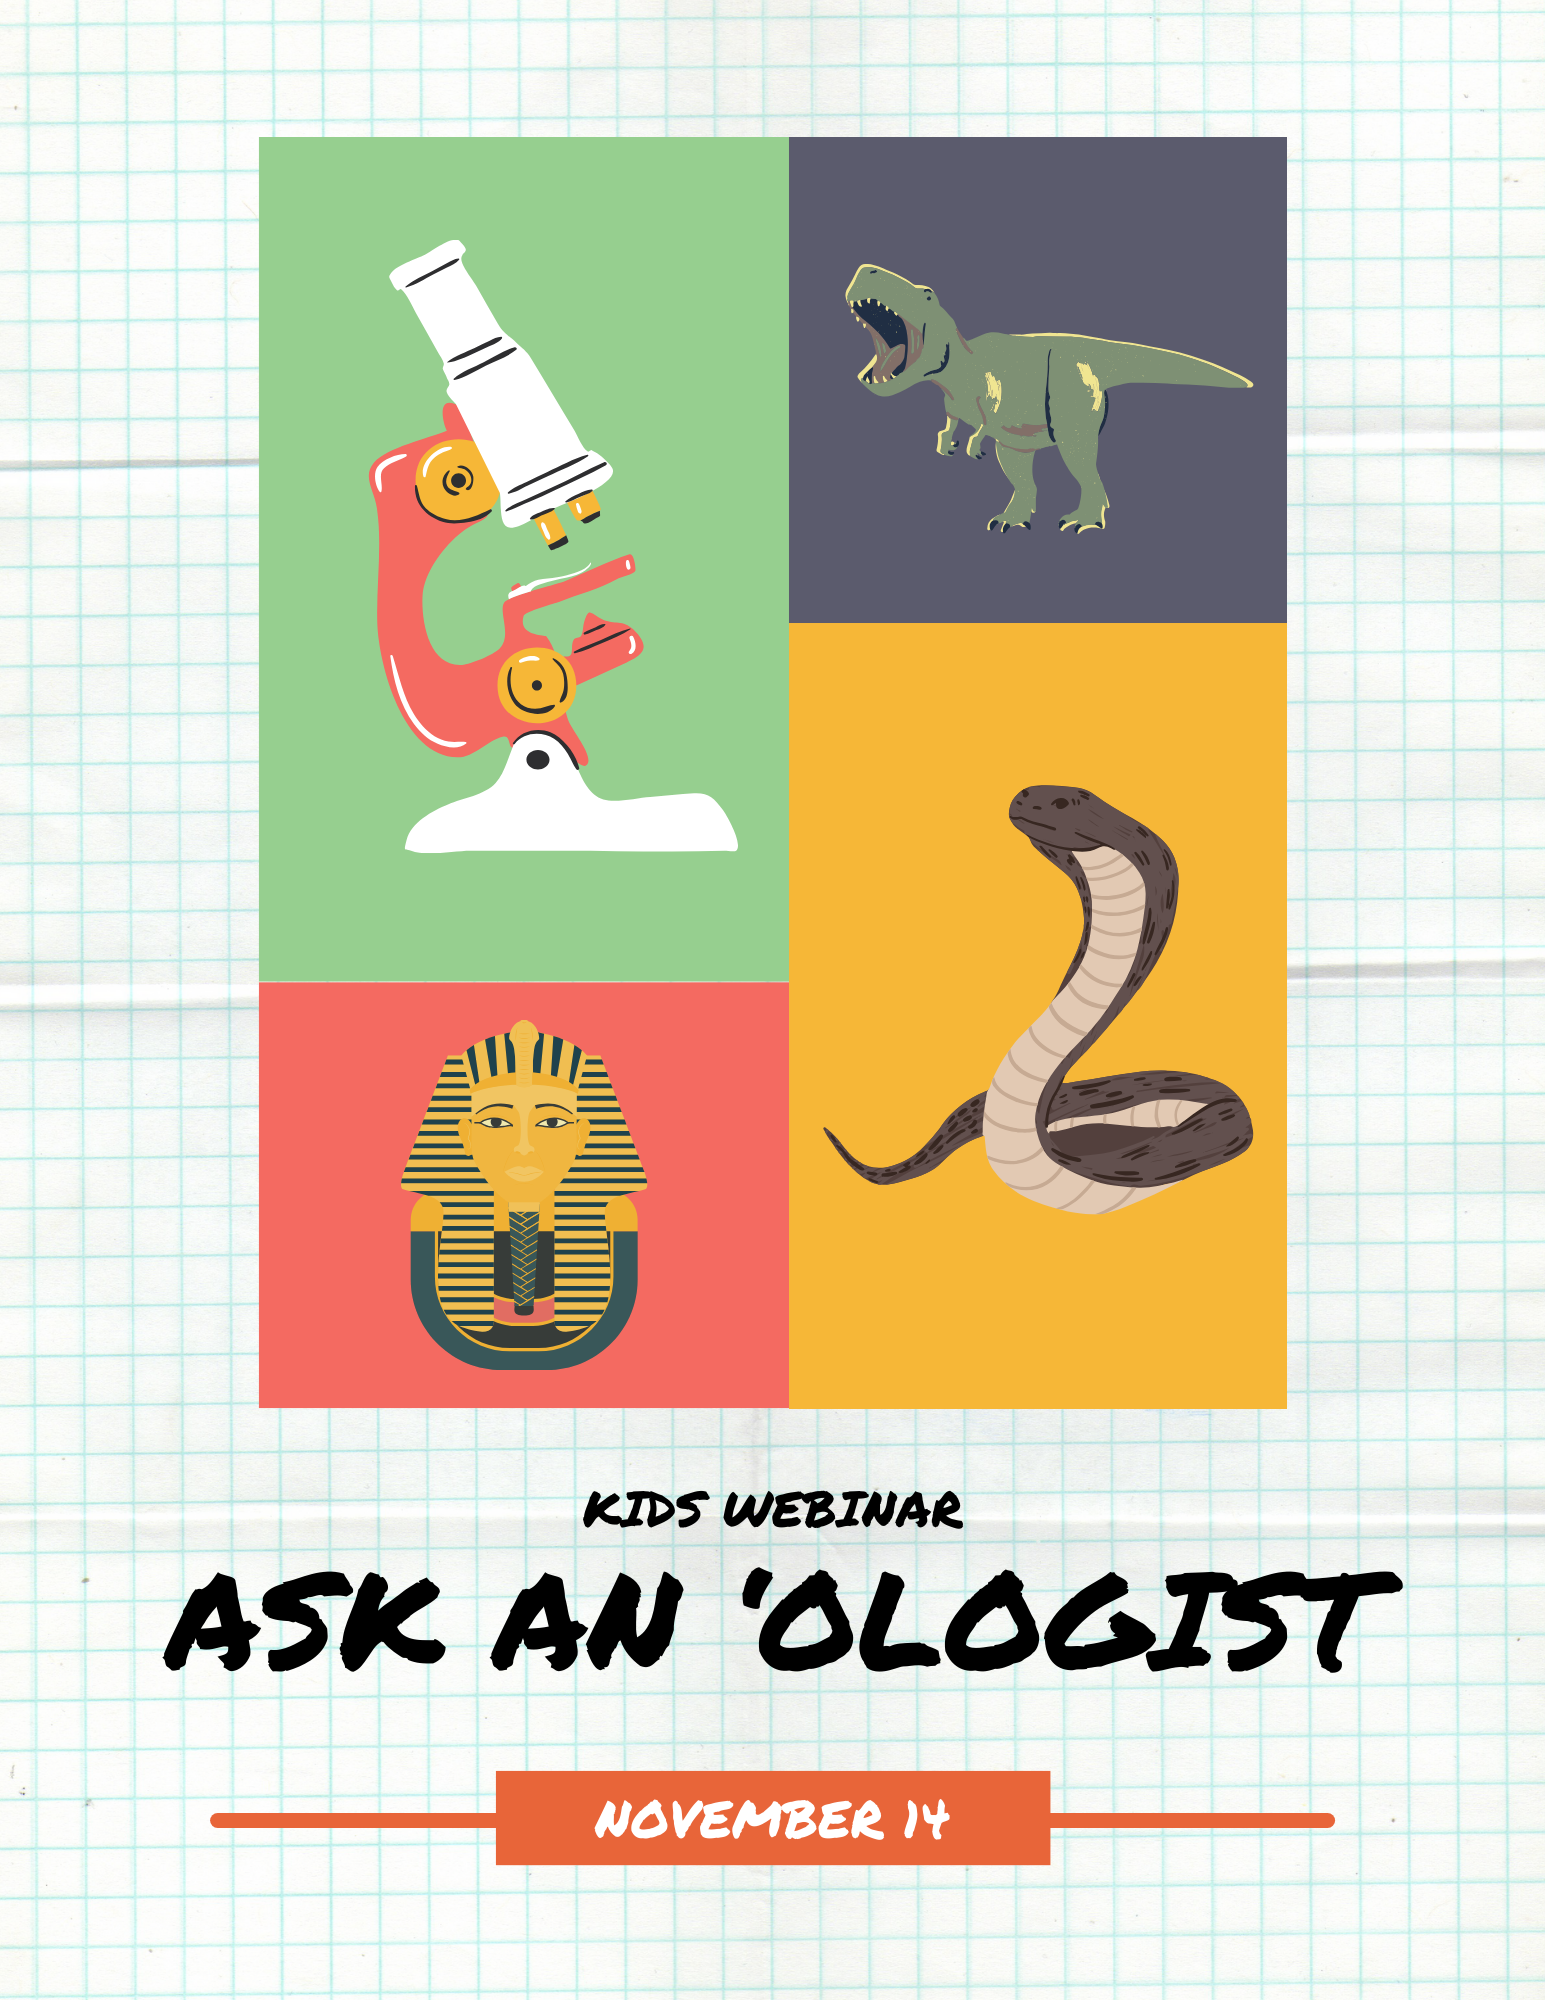 Photo has a graph paper background and says "Ask An 'Ologist" in black lettering. In multicolored boxes there are cartoon images of a mummy head, a dinosaur, a microscope, and a snake.